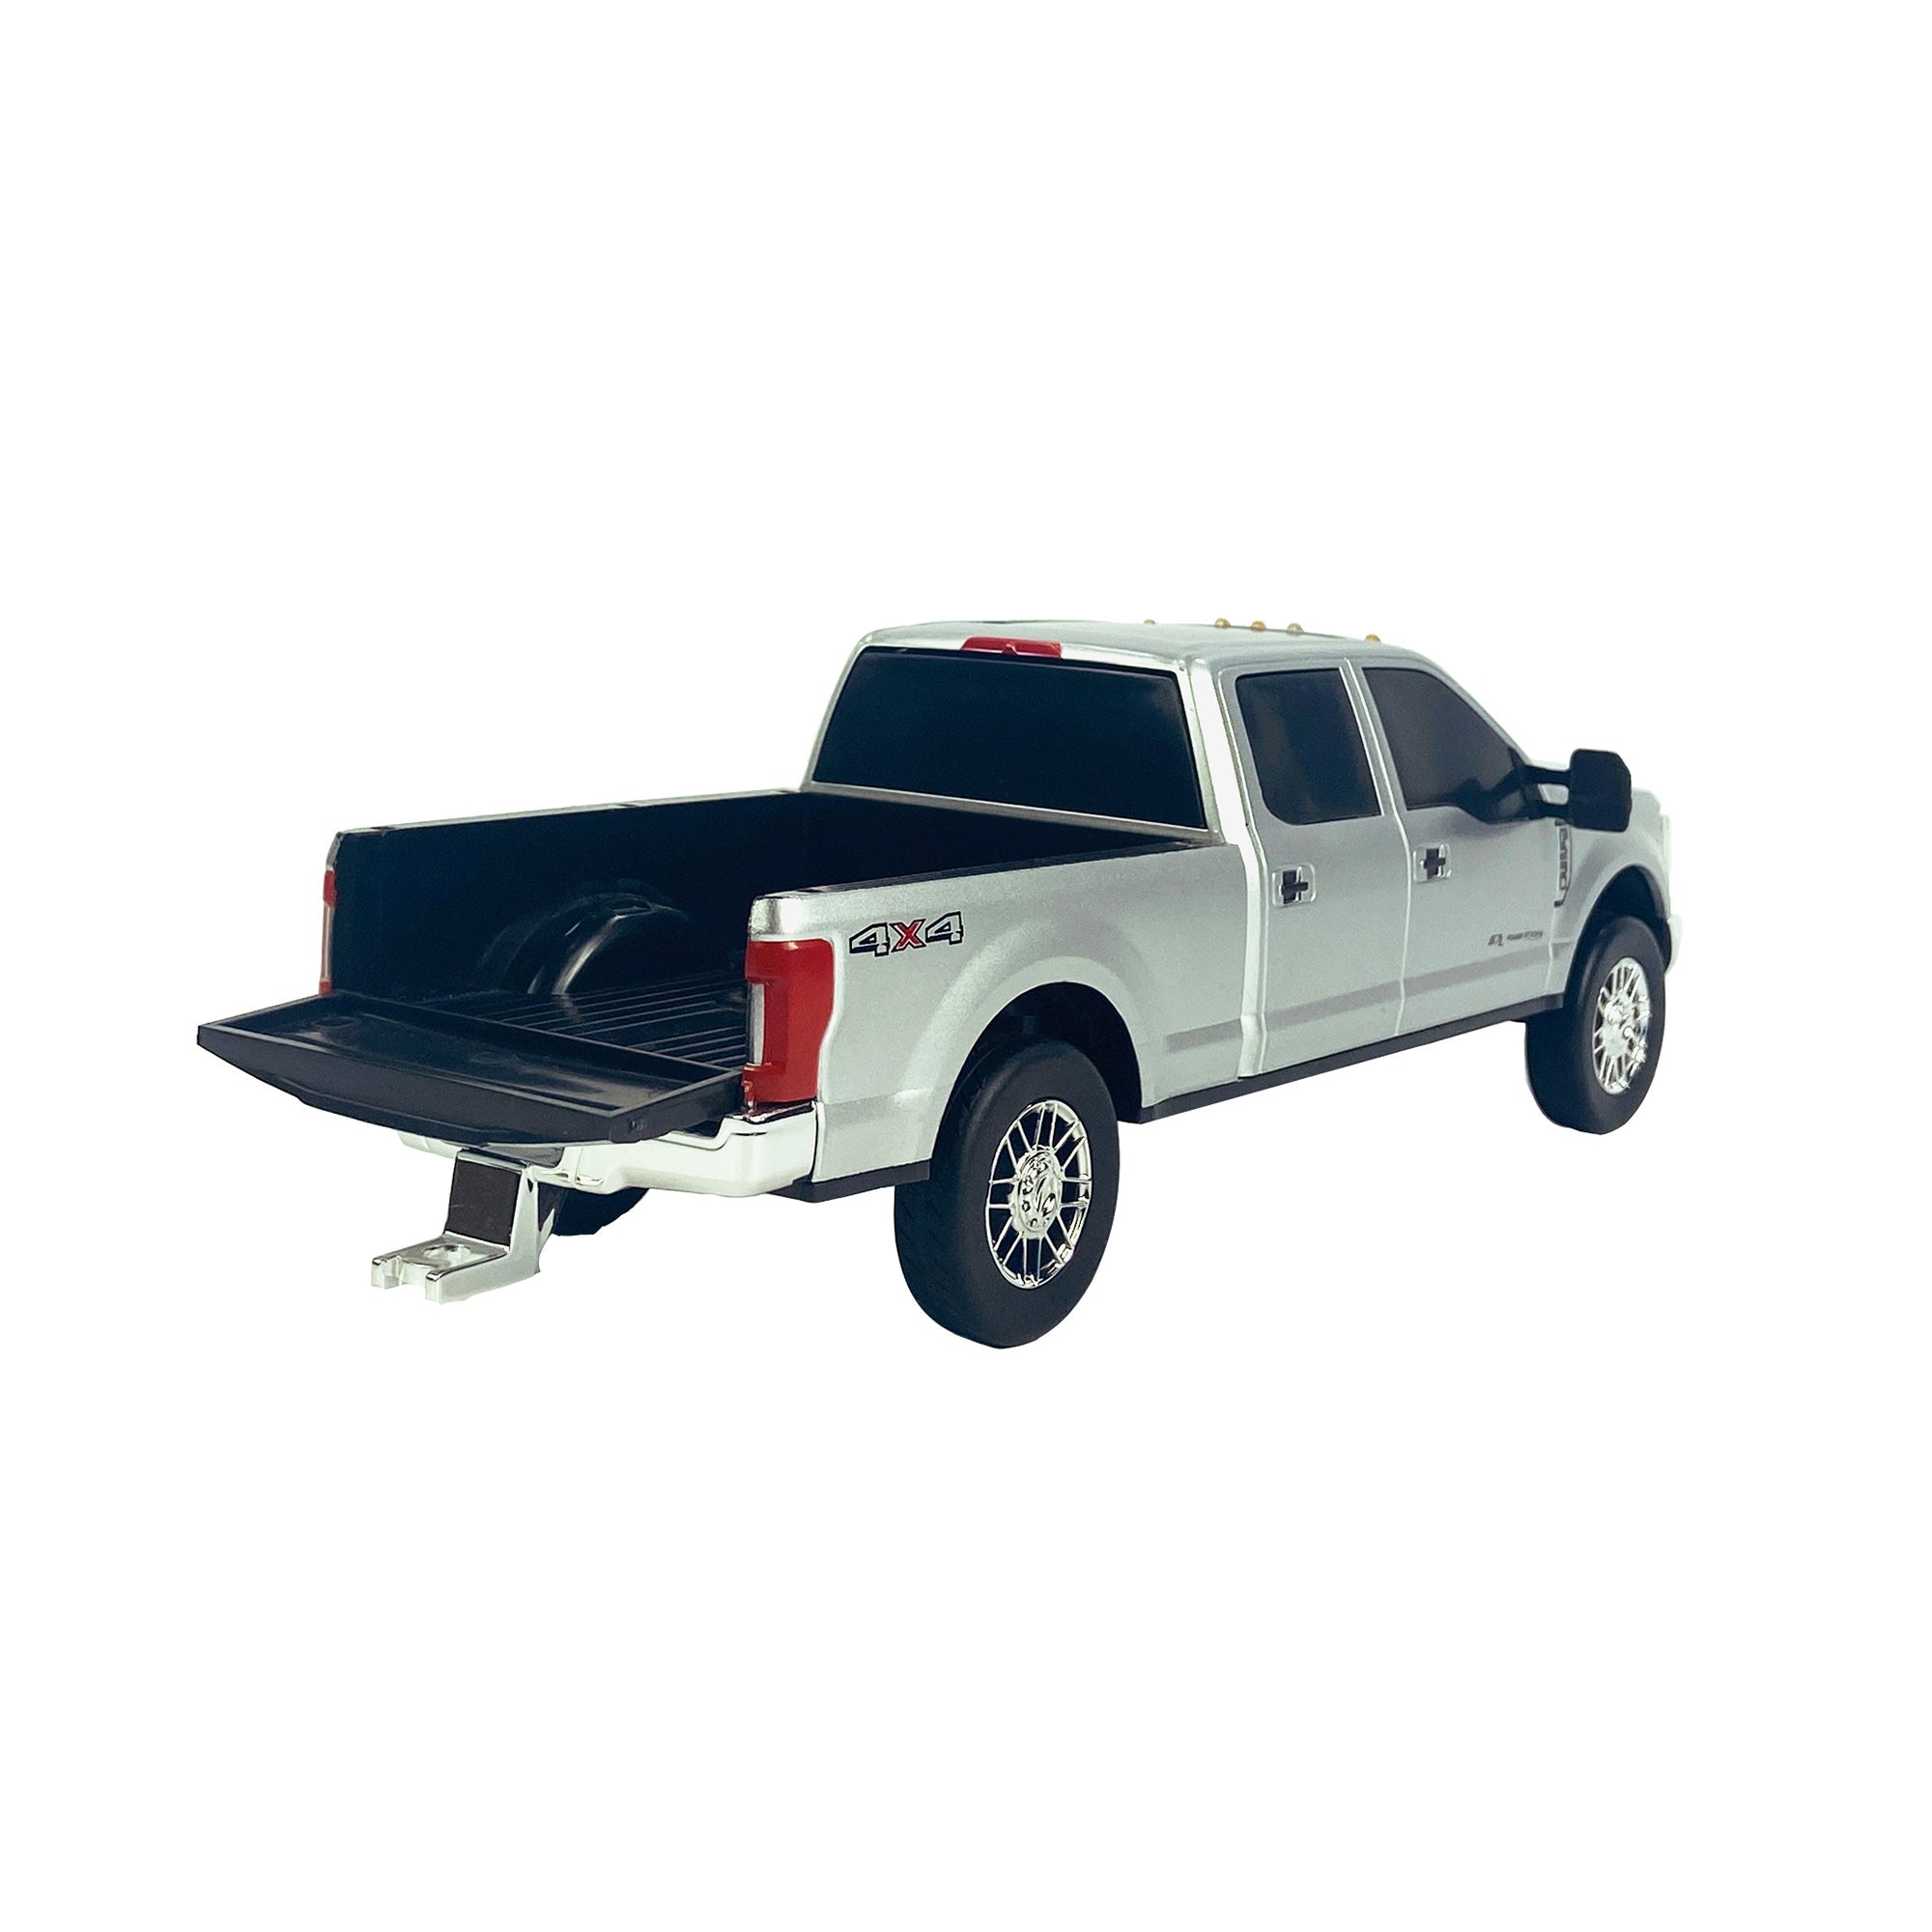 Ford F250 Truck & Bass Fishing Boat Combo